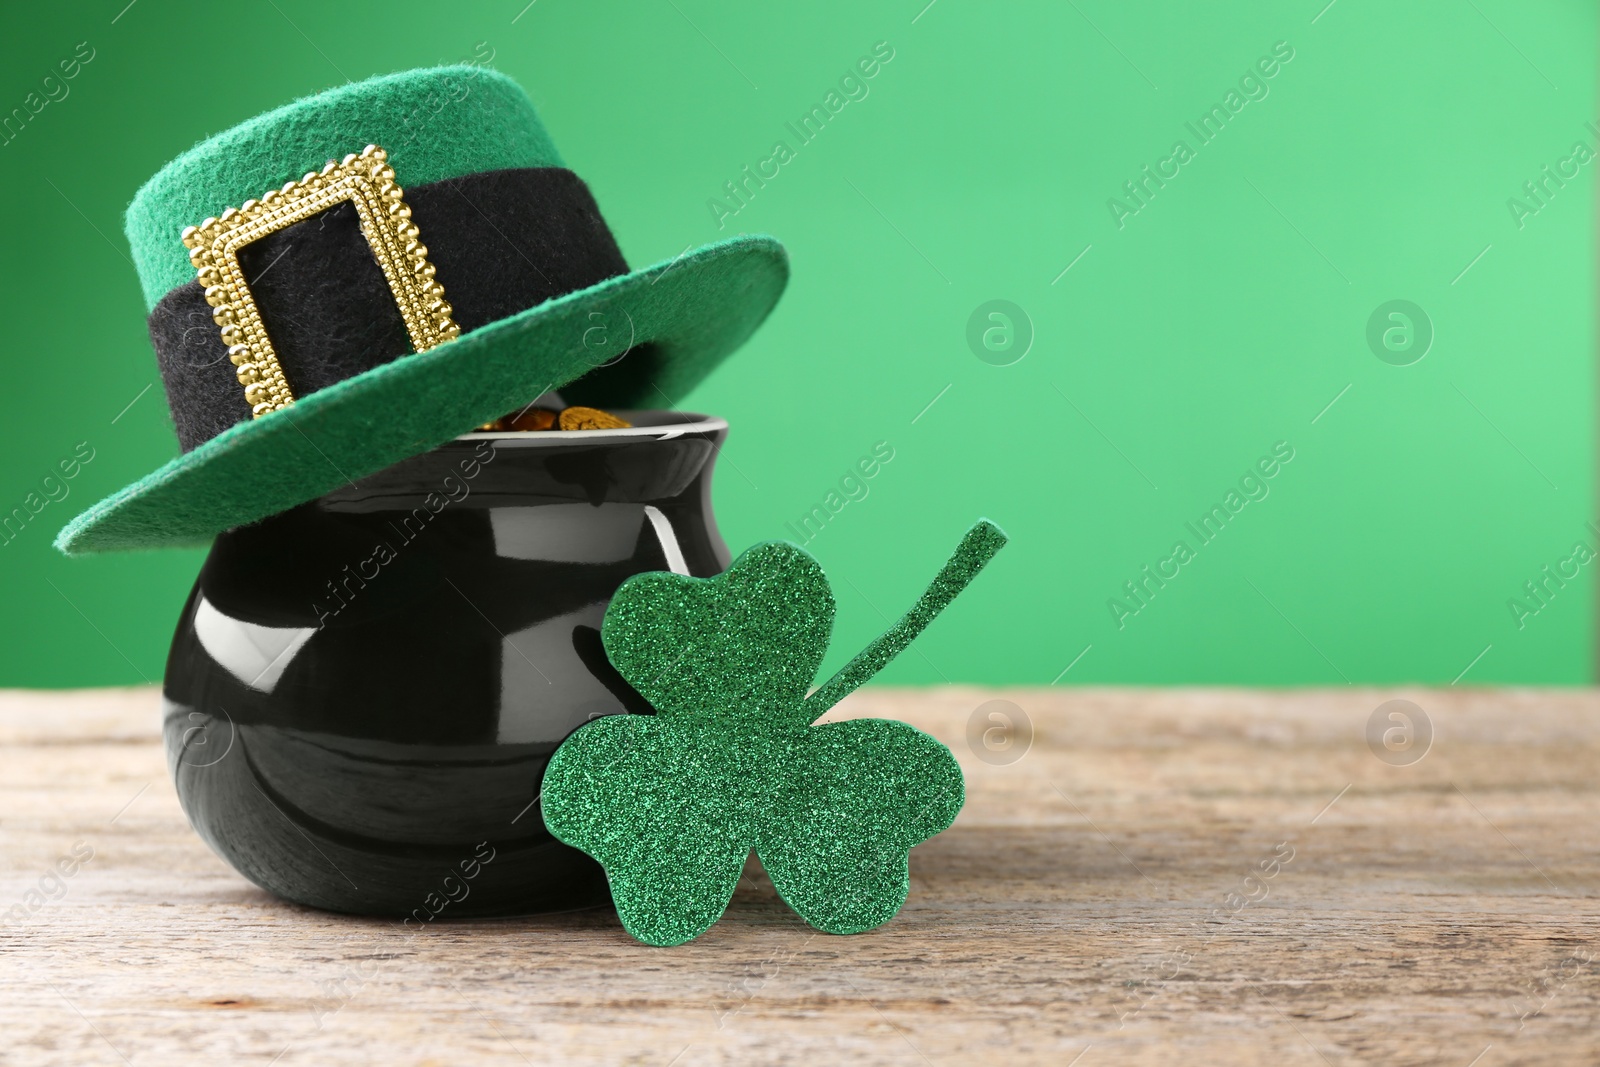 Photo of St. Patrick's day. Pot of gold with leprechaun hat and decorative clover leaf on wooden table. Space for text